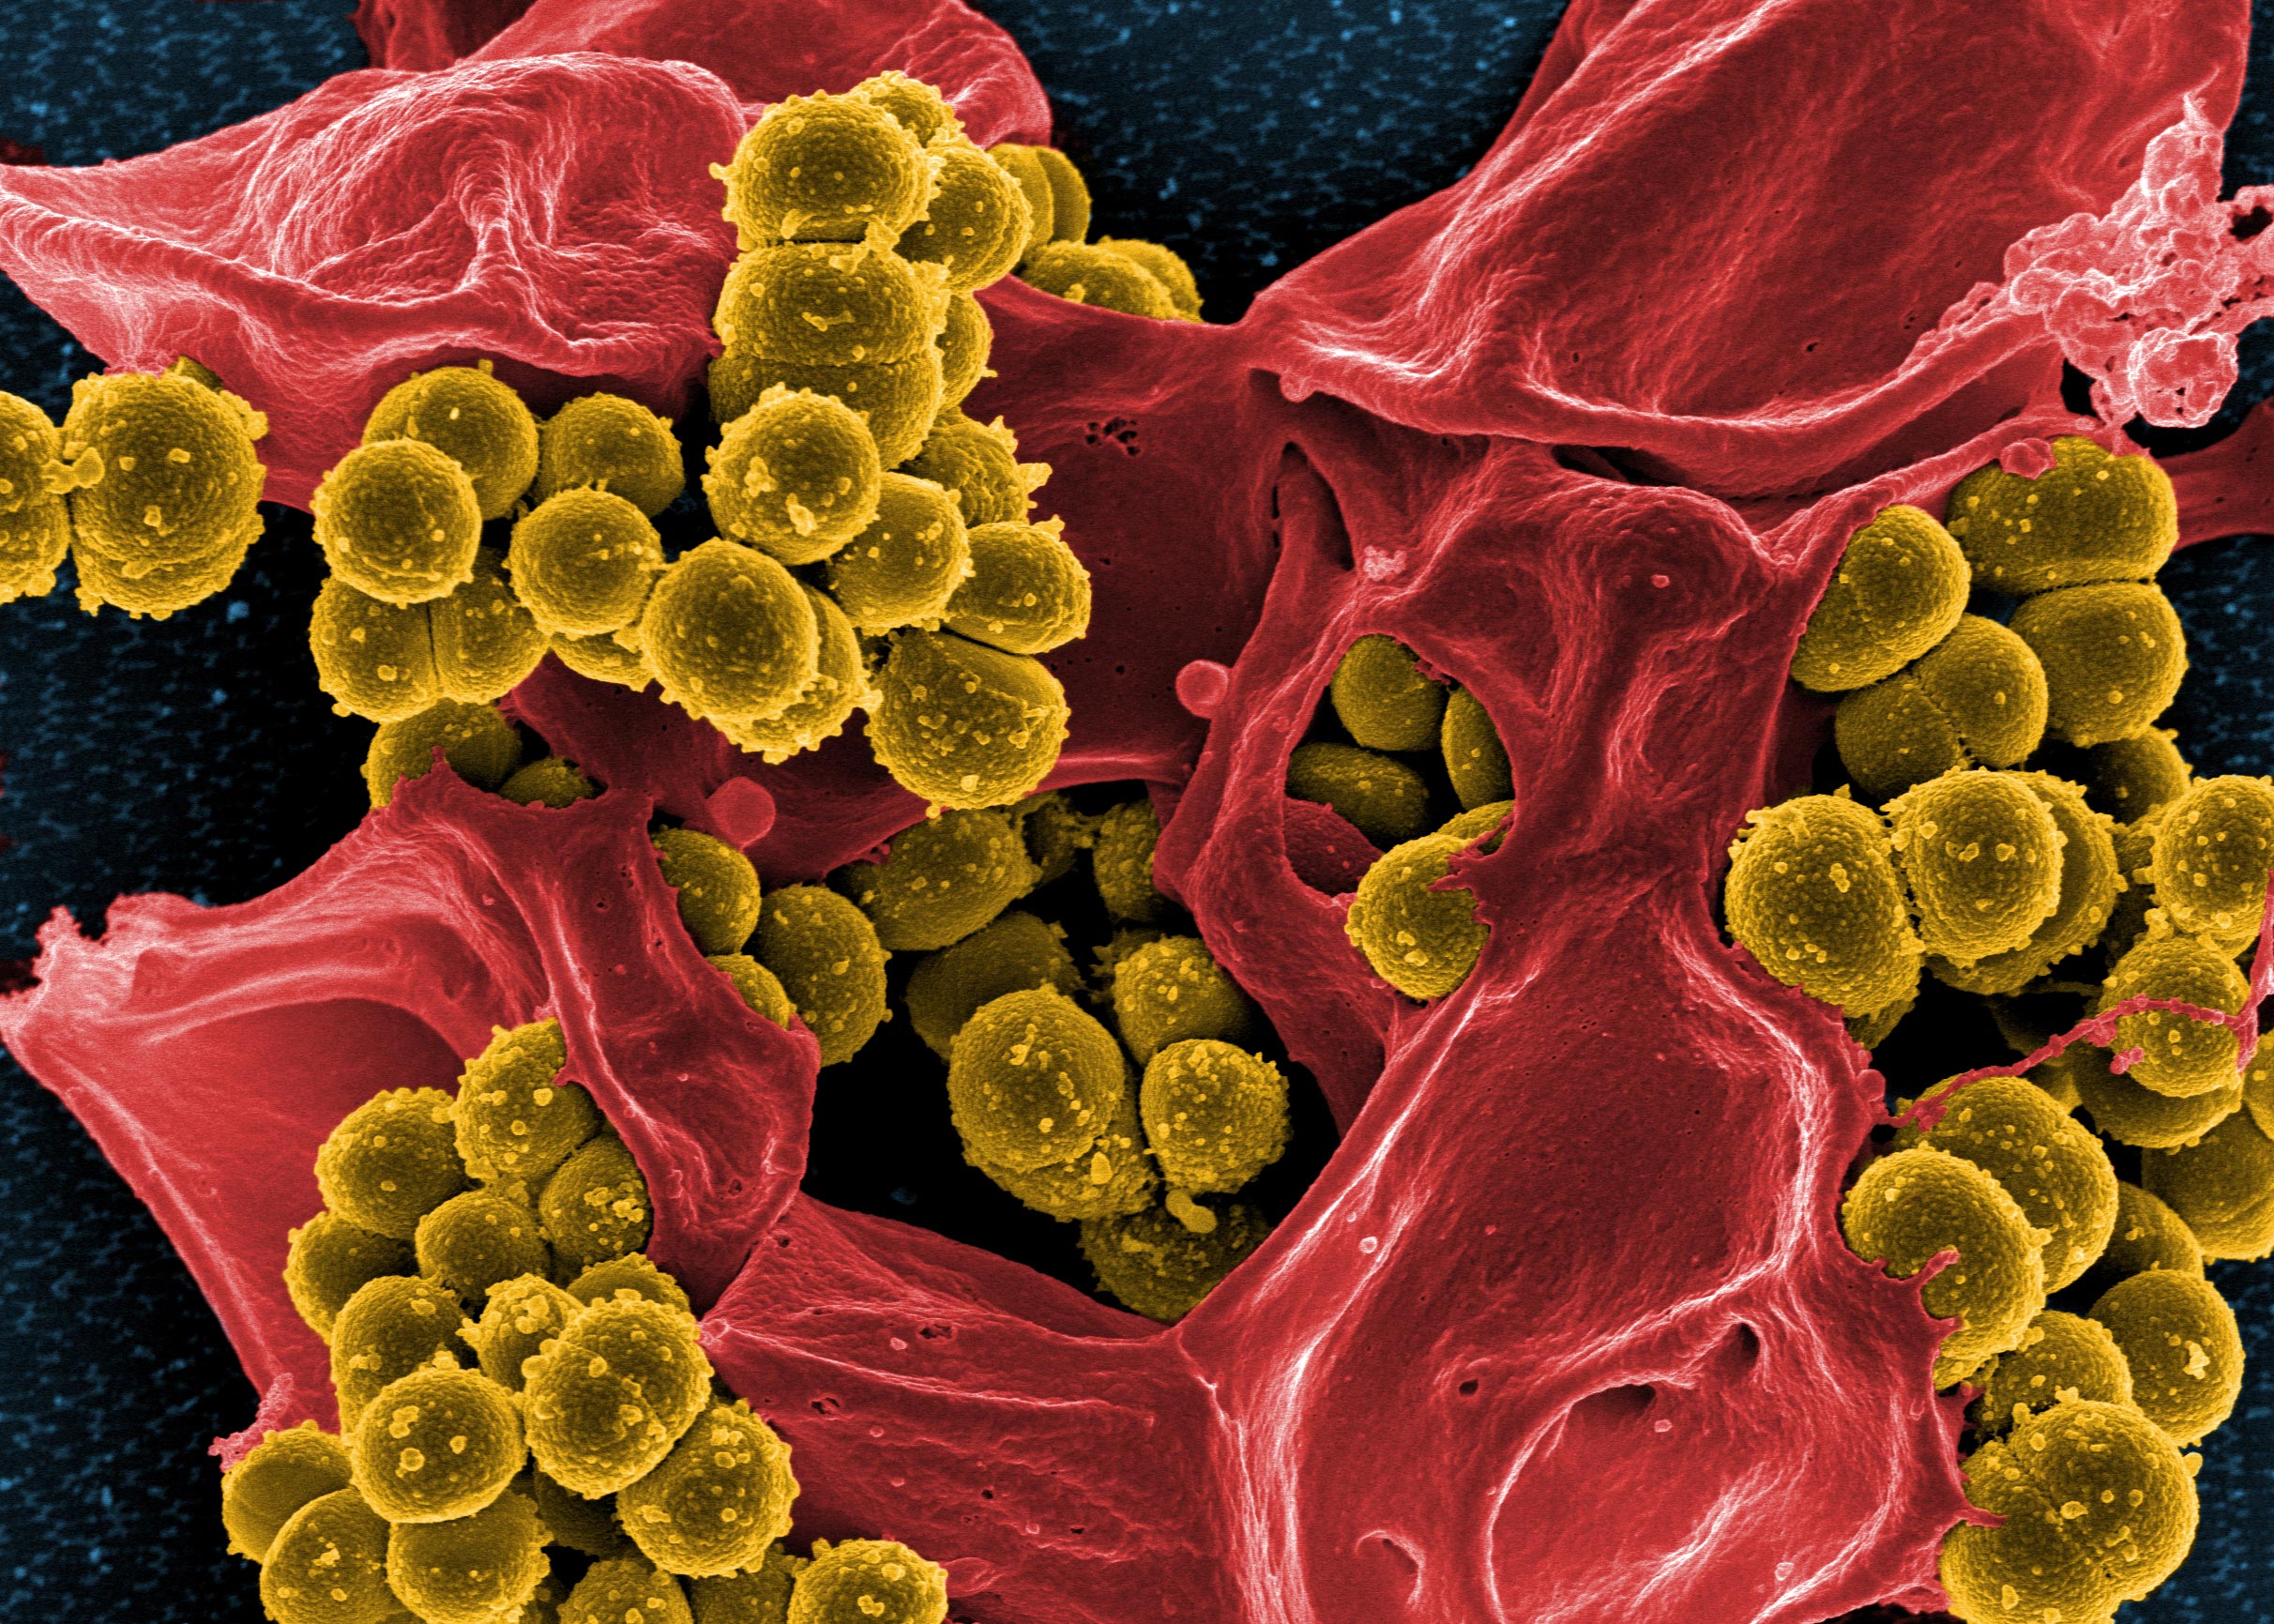 Staphylococcus: From Harmless Skin Bacteria to Deadly Pathogen